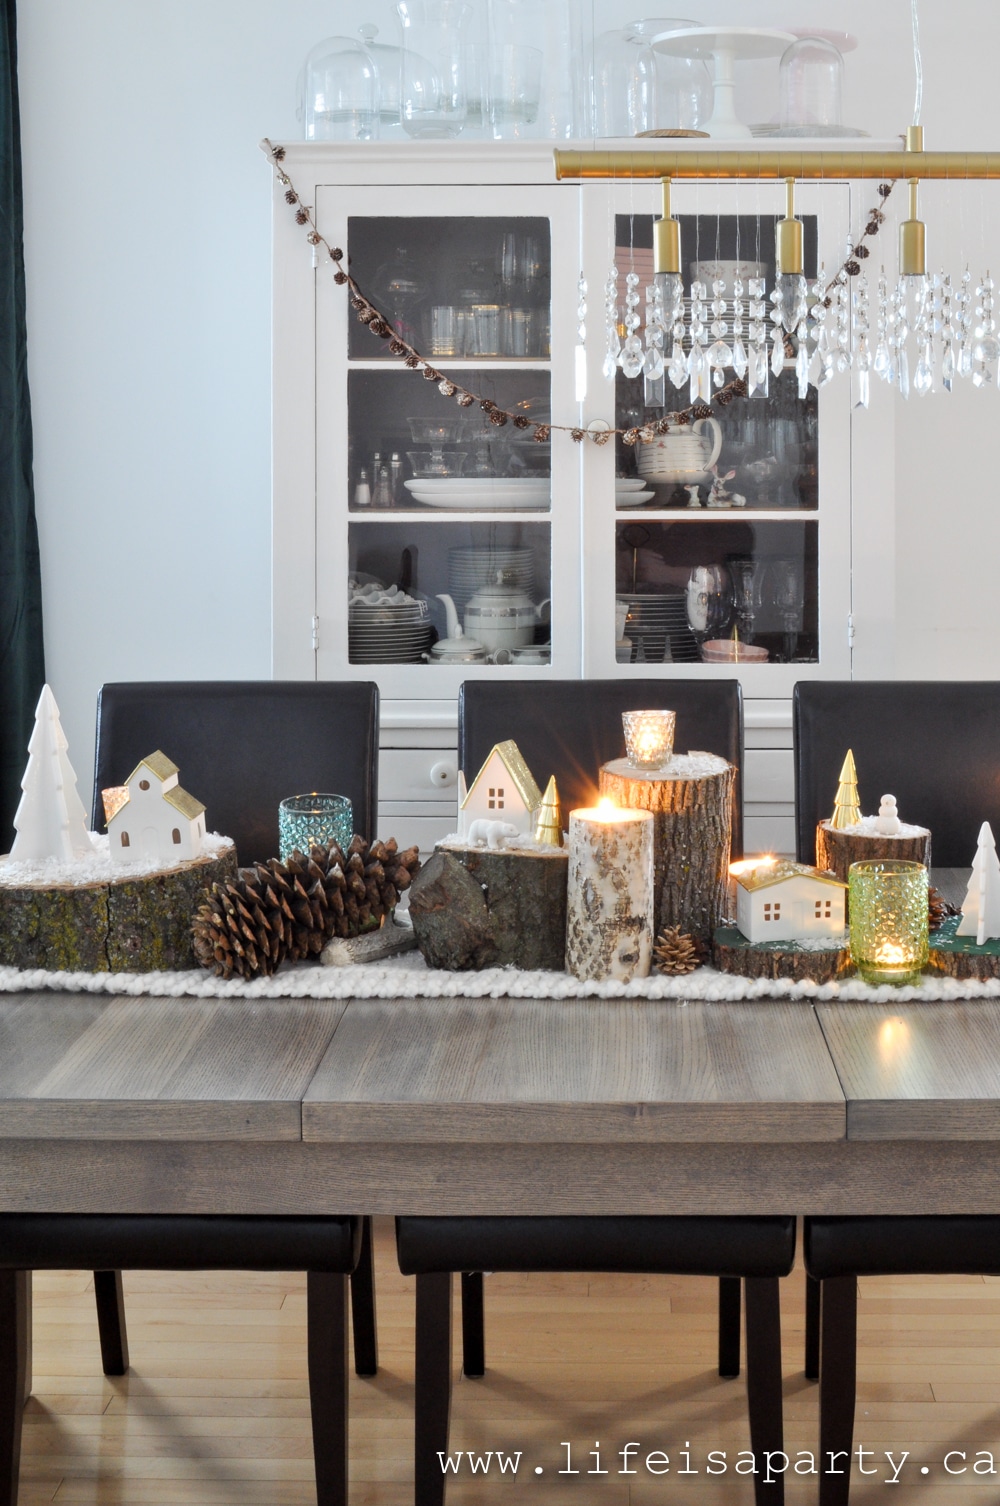 Christmas table scape with wood logs and candles and green decor